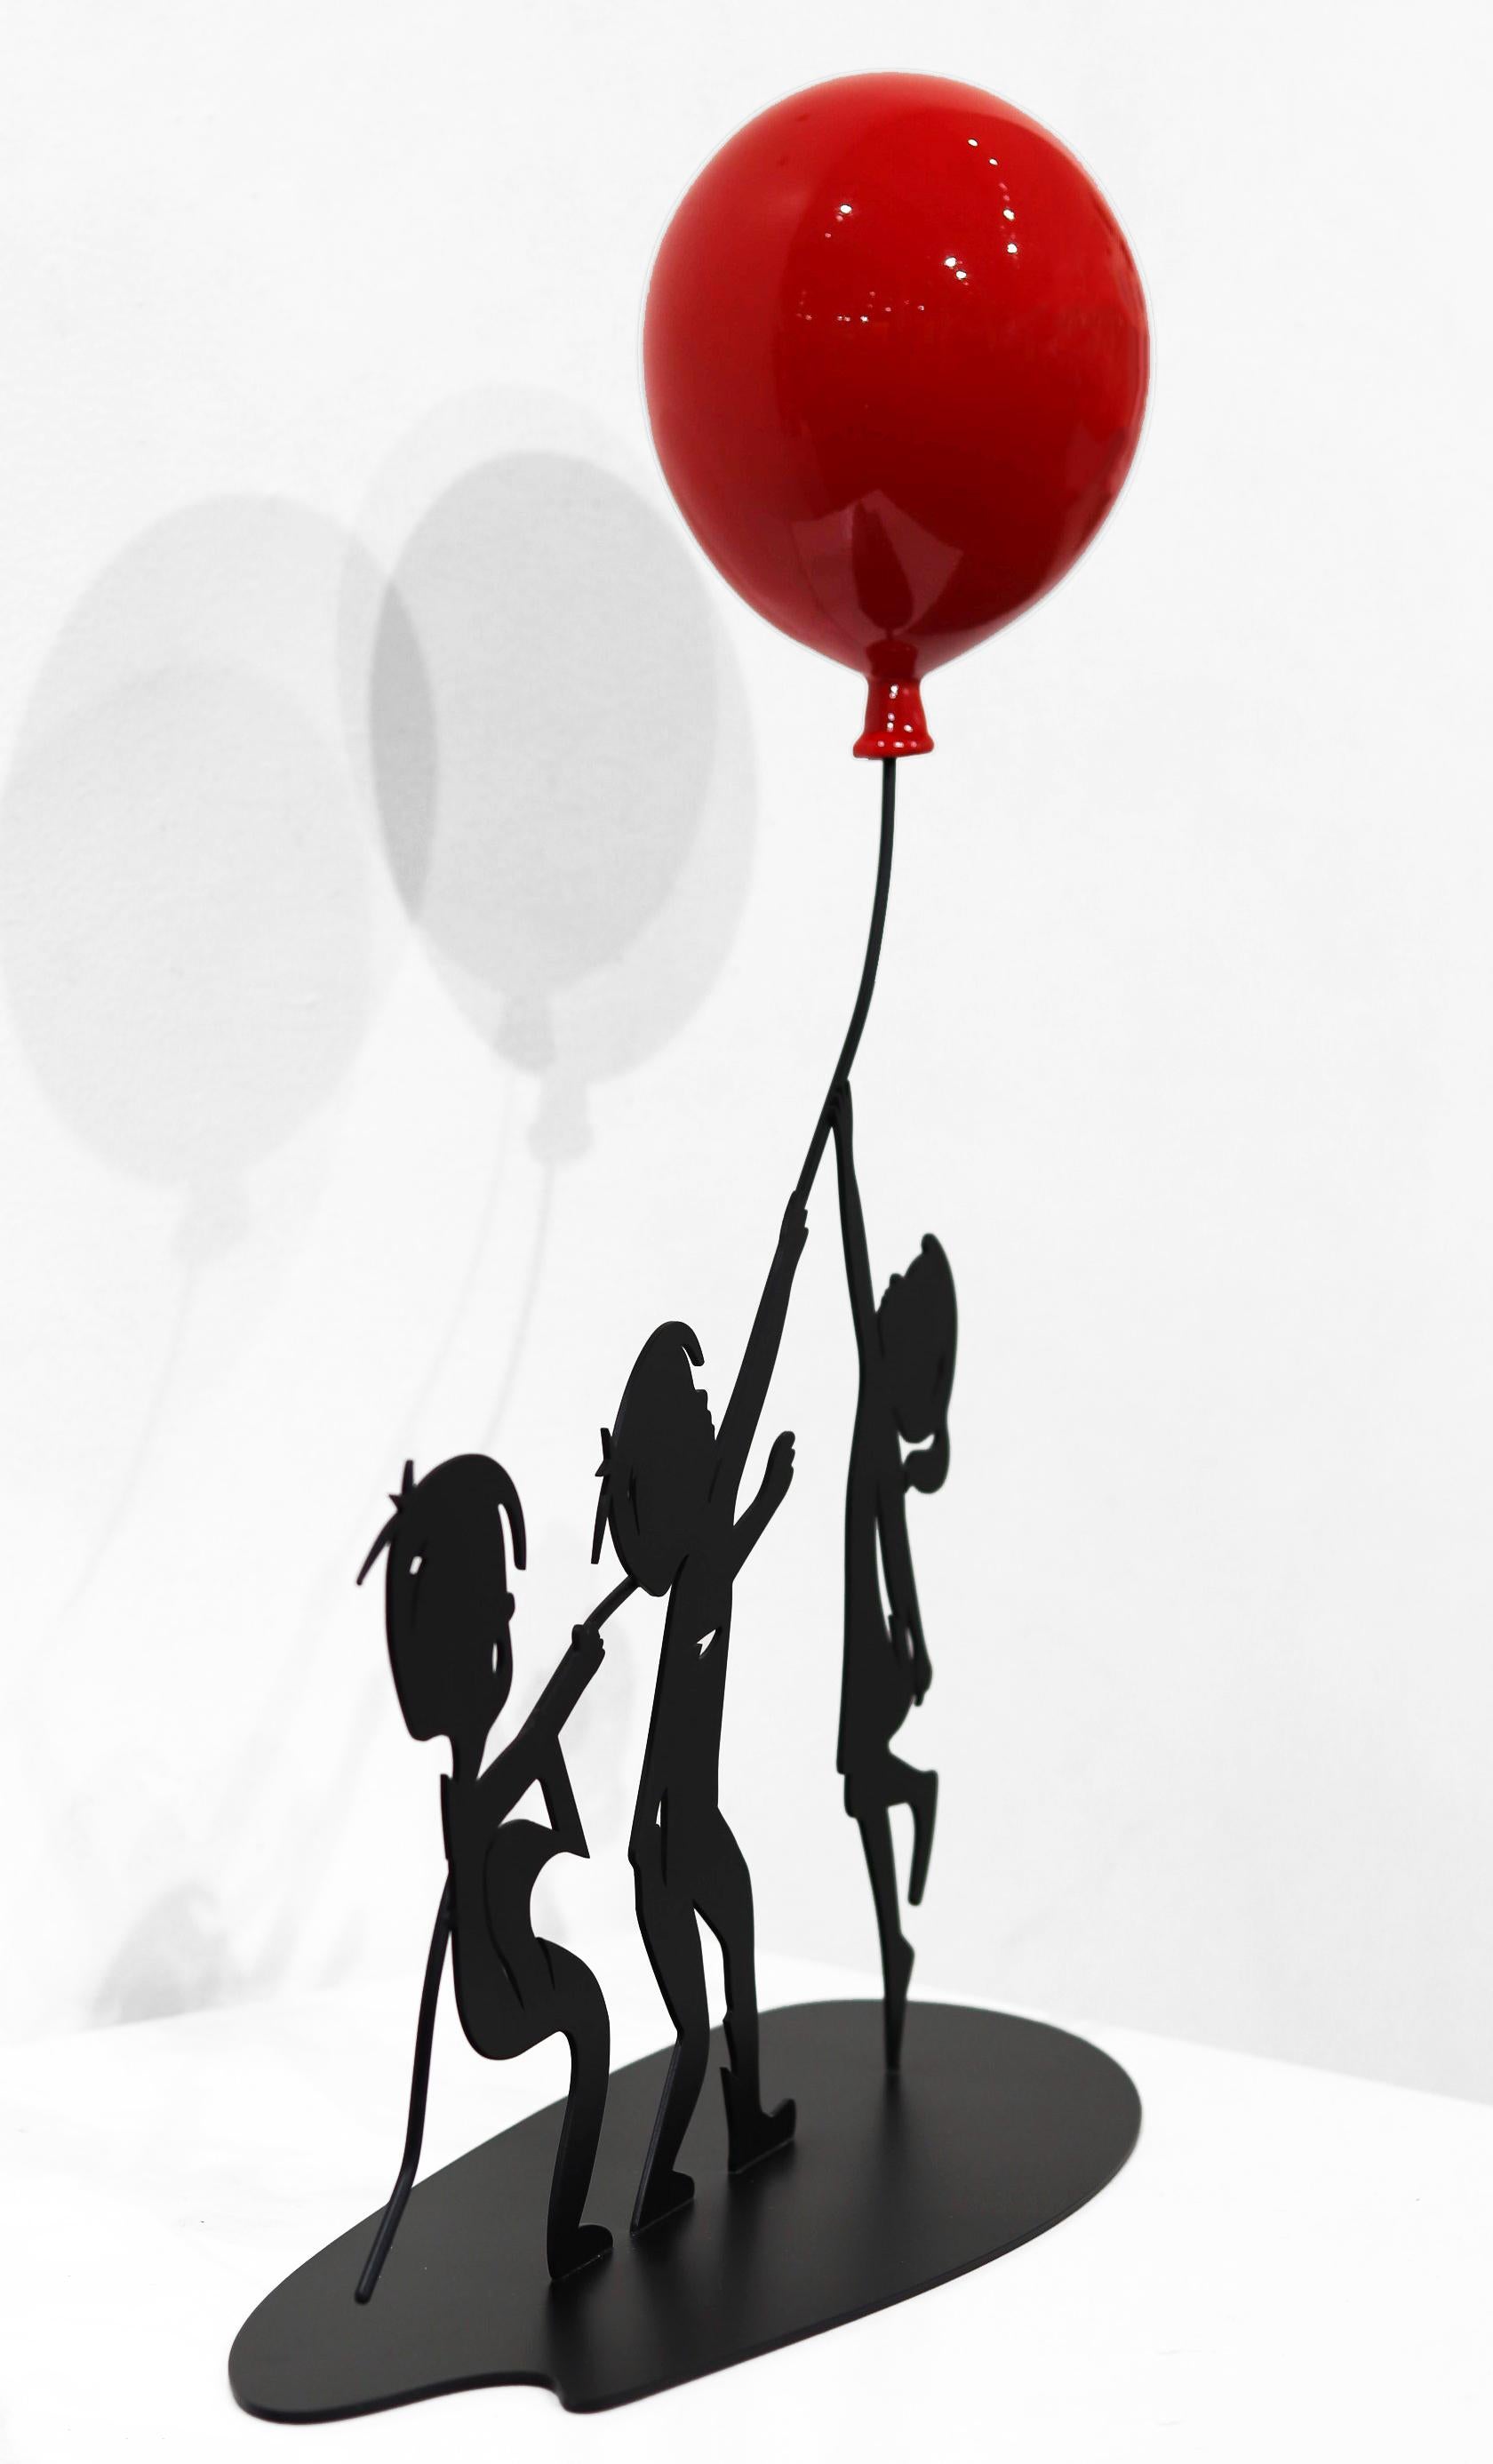 Big Dreams - Figurative Steel Sculpture with Glossy Red Balloon For Sale 1